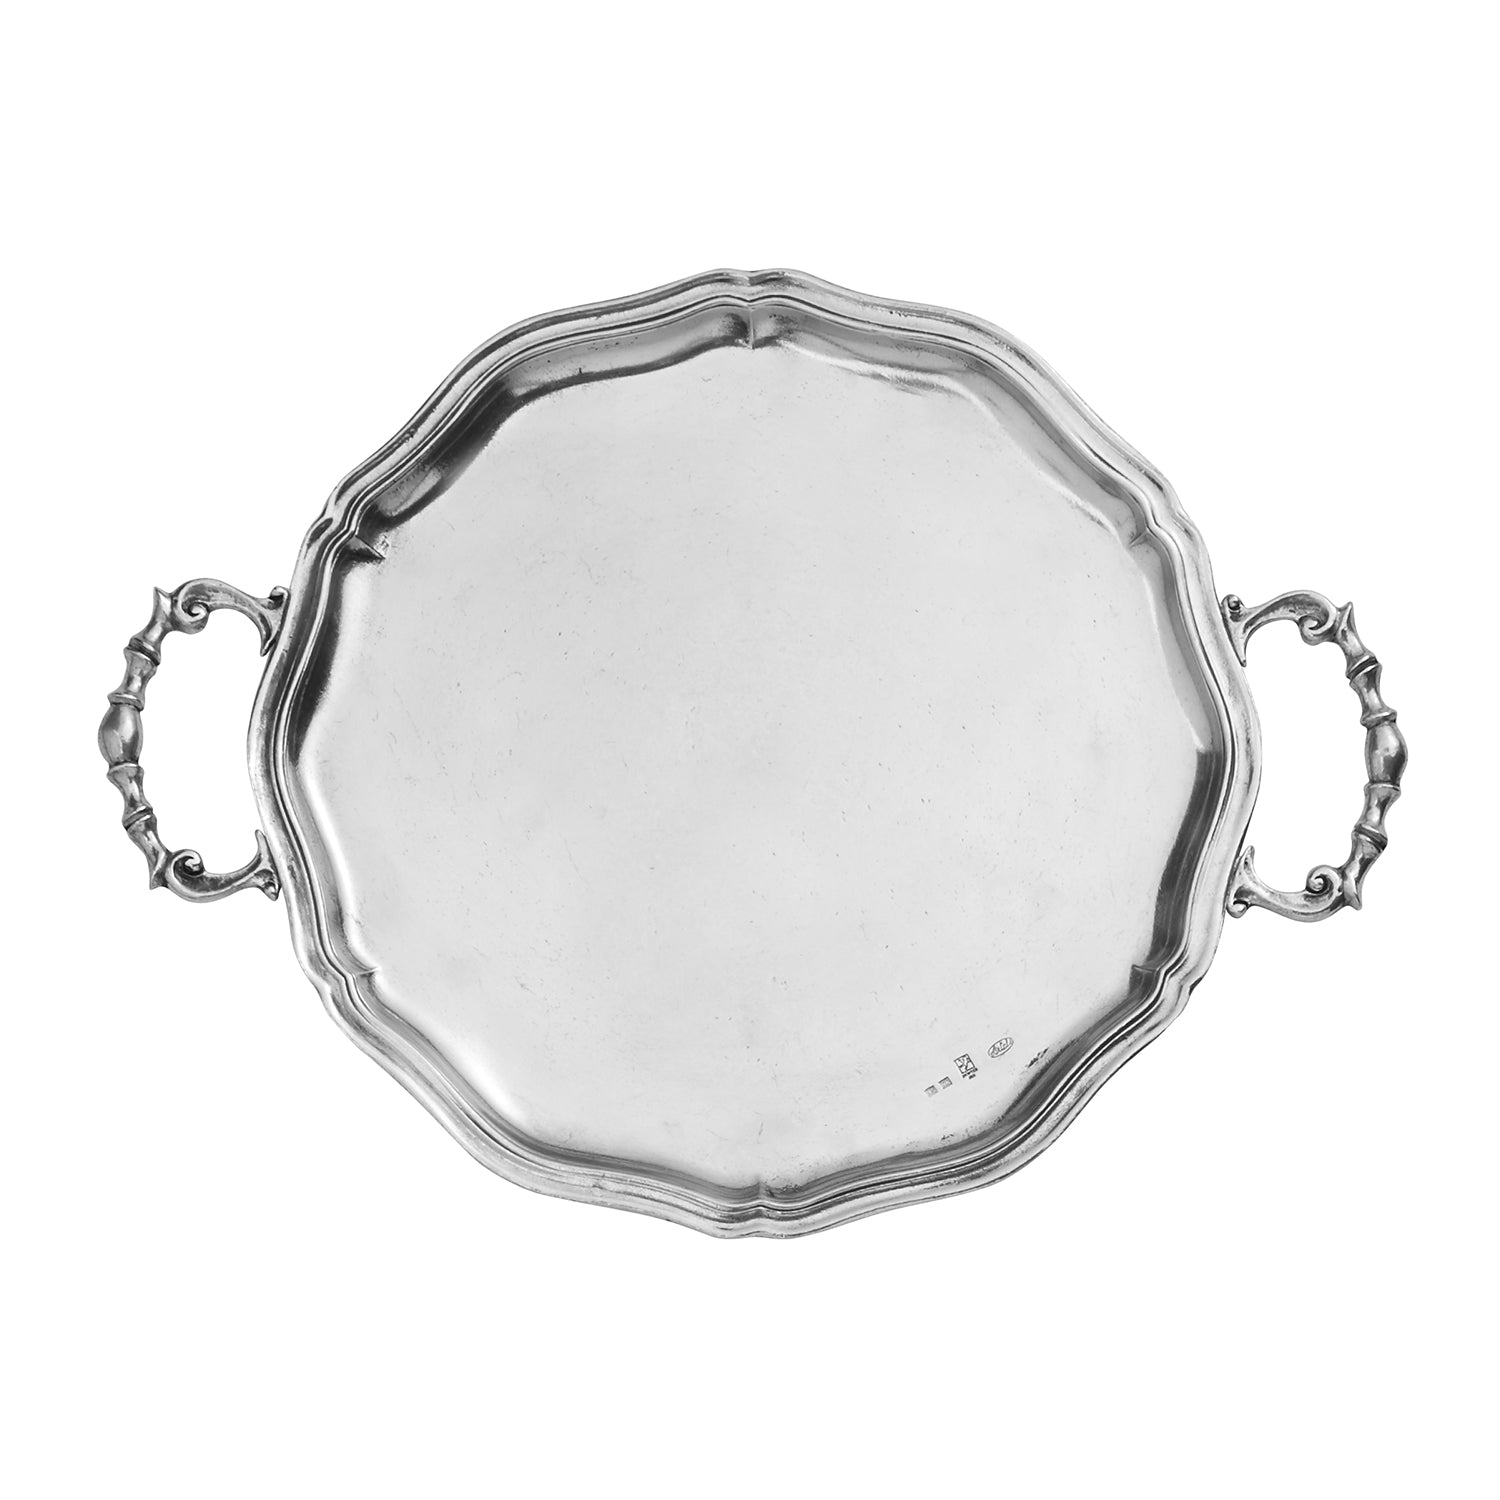 Arte Italica Vintage Scalloped Tray with Handles